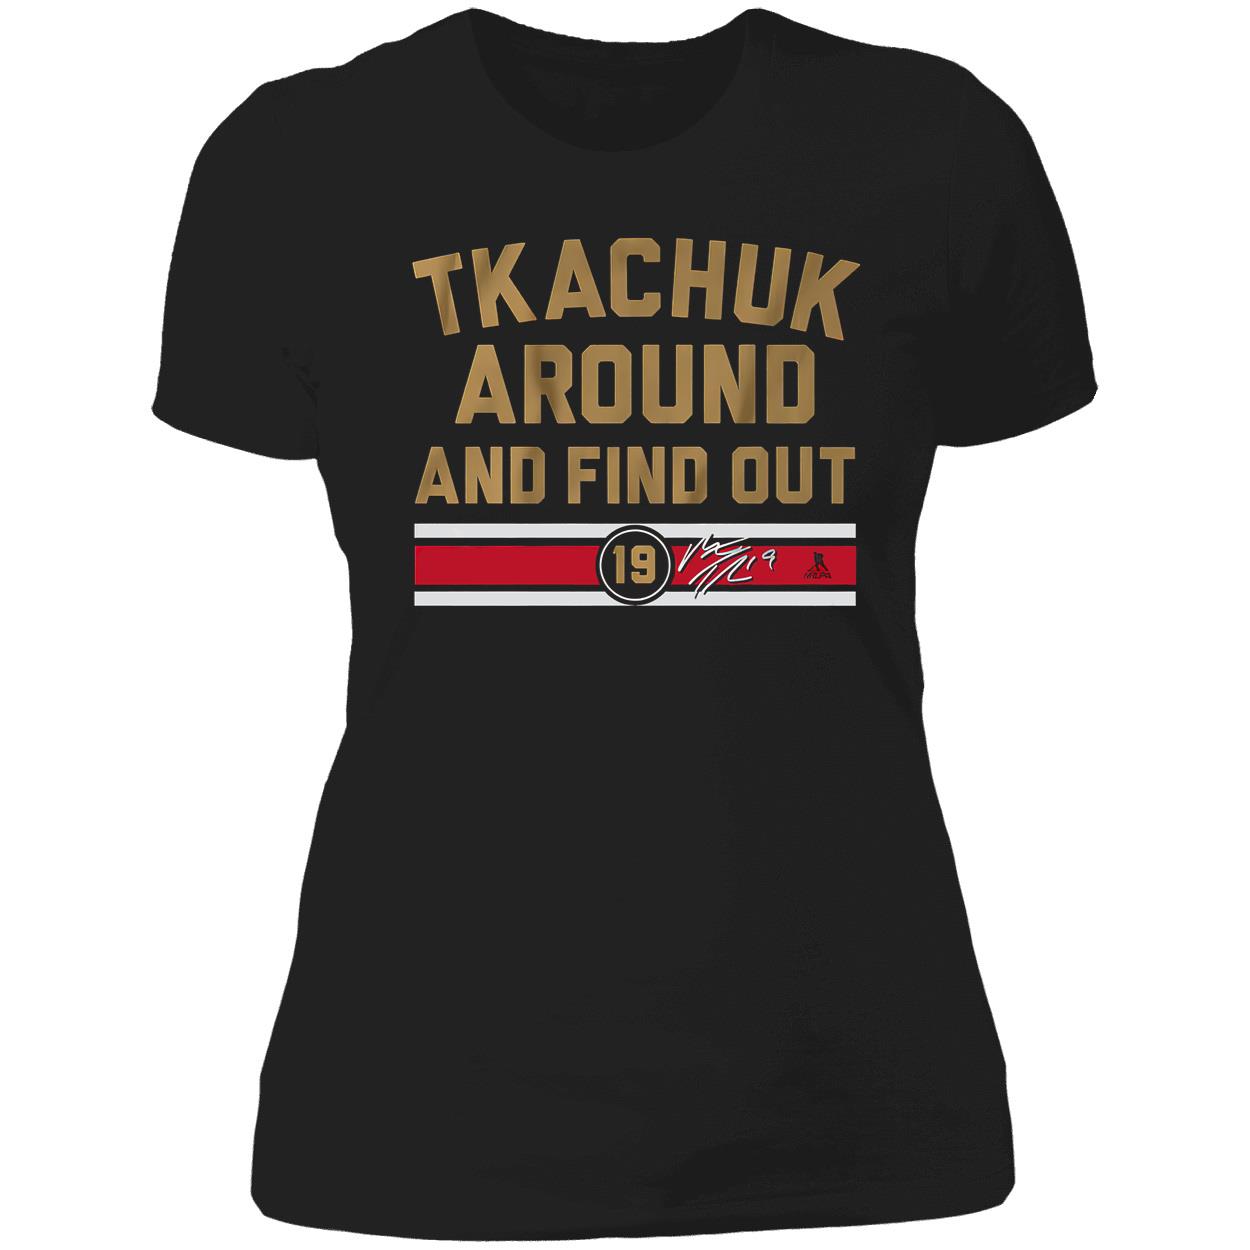 Tkachuk Around And Find Out Shirt